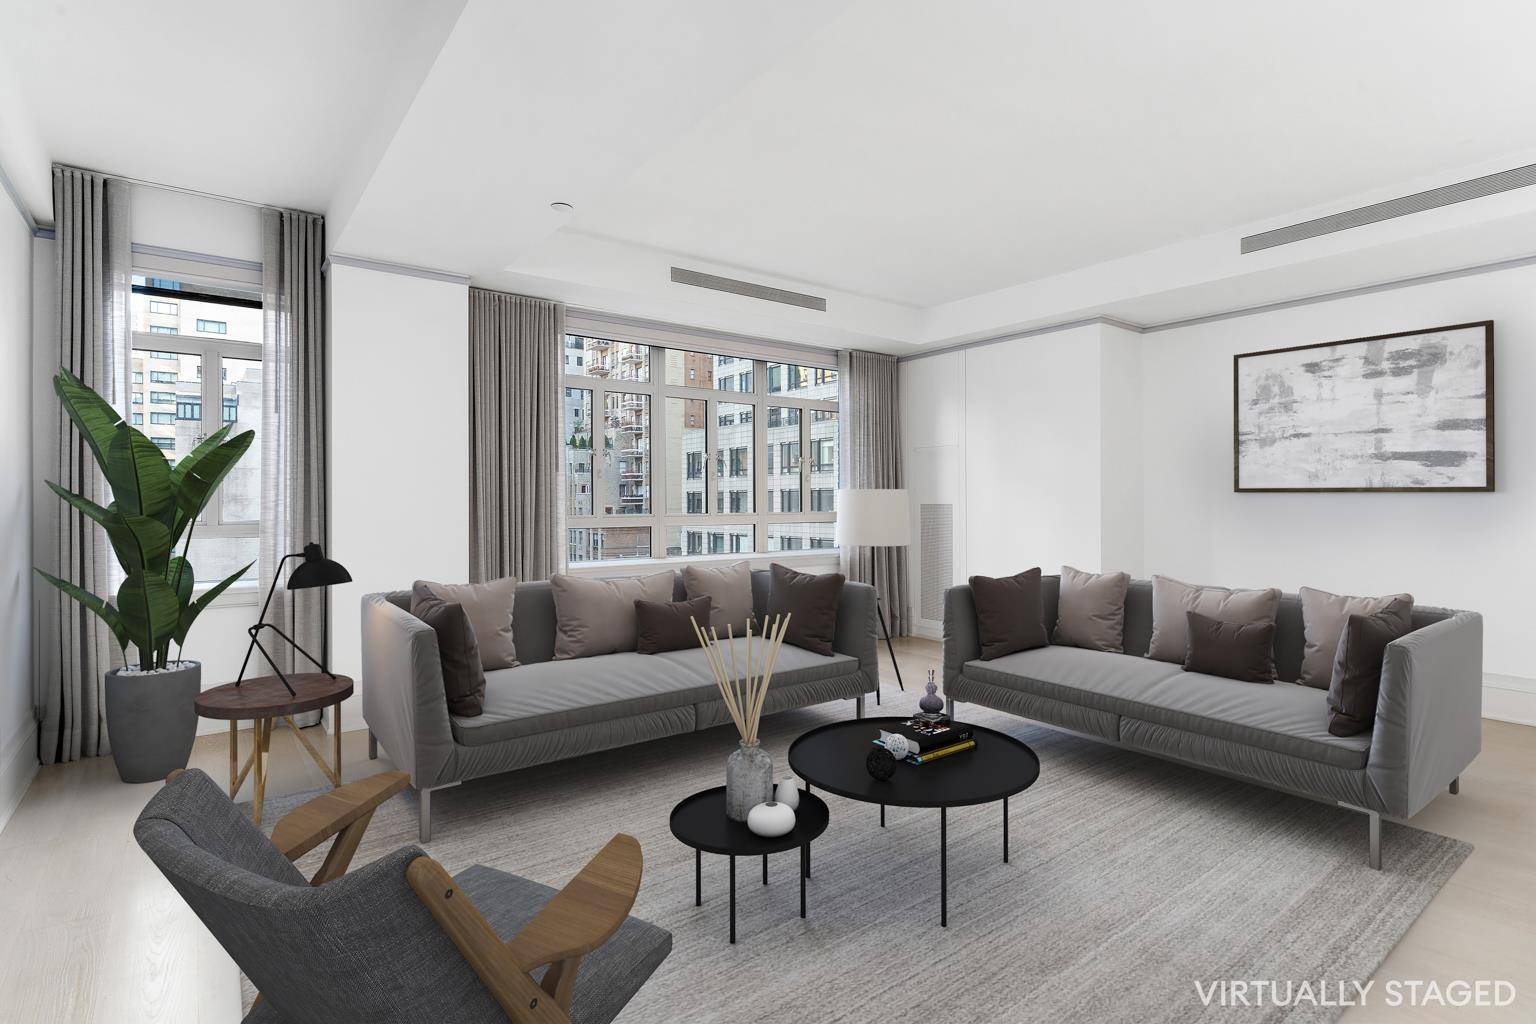 Enjoy luxurious hotel style living in this gorgeous 2 bedroom, 2 and a half bathroom apartment at the exclusive Carlton House condominium at 21 East 61st Street, just one block ...